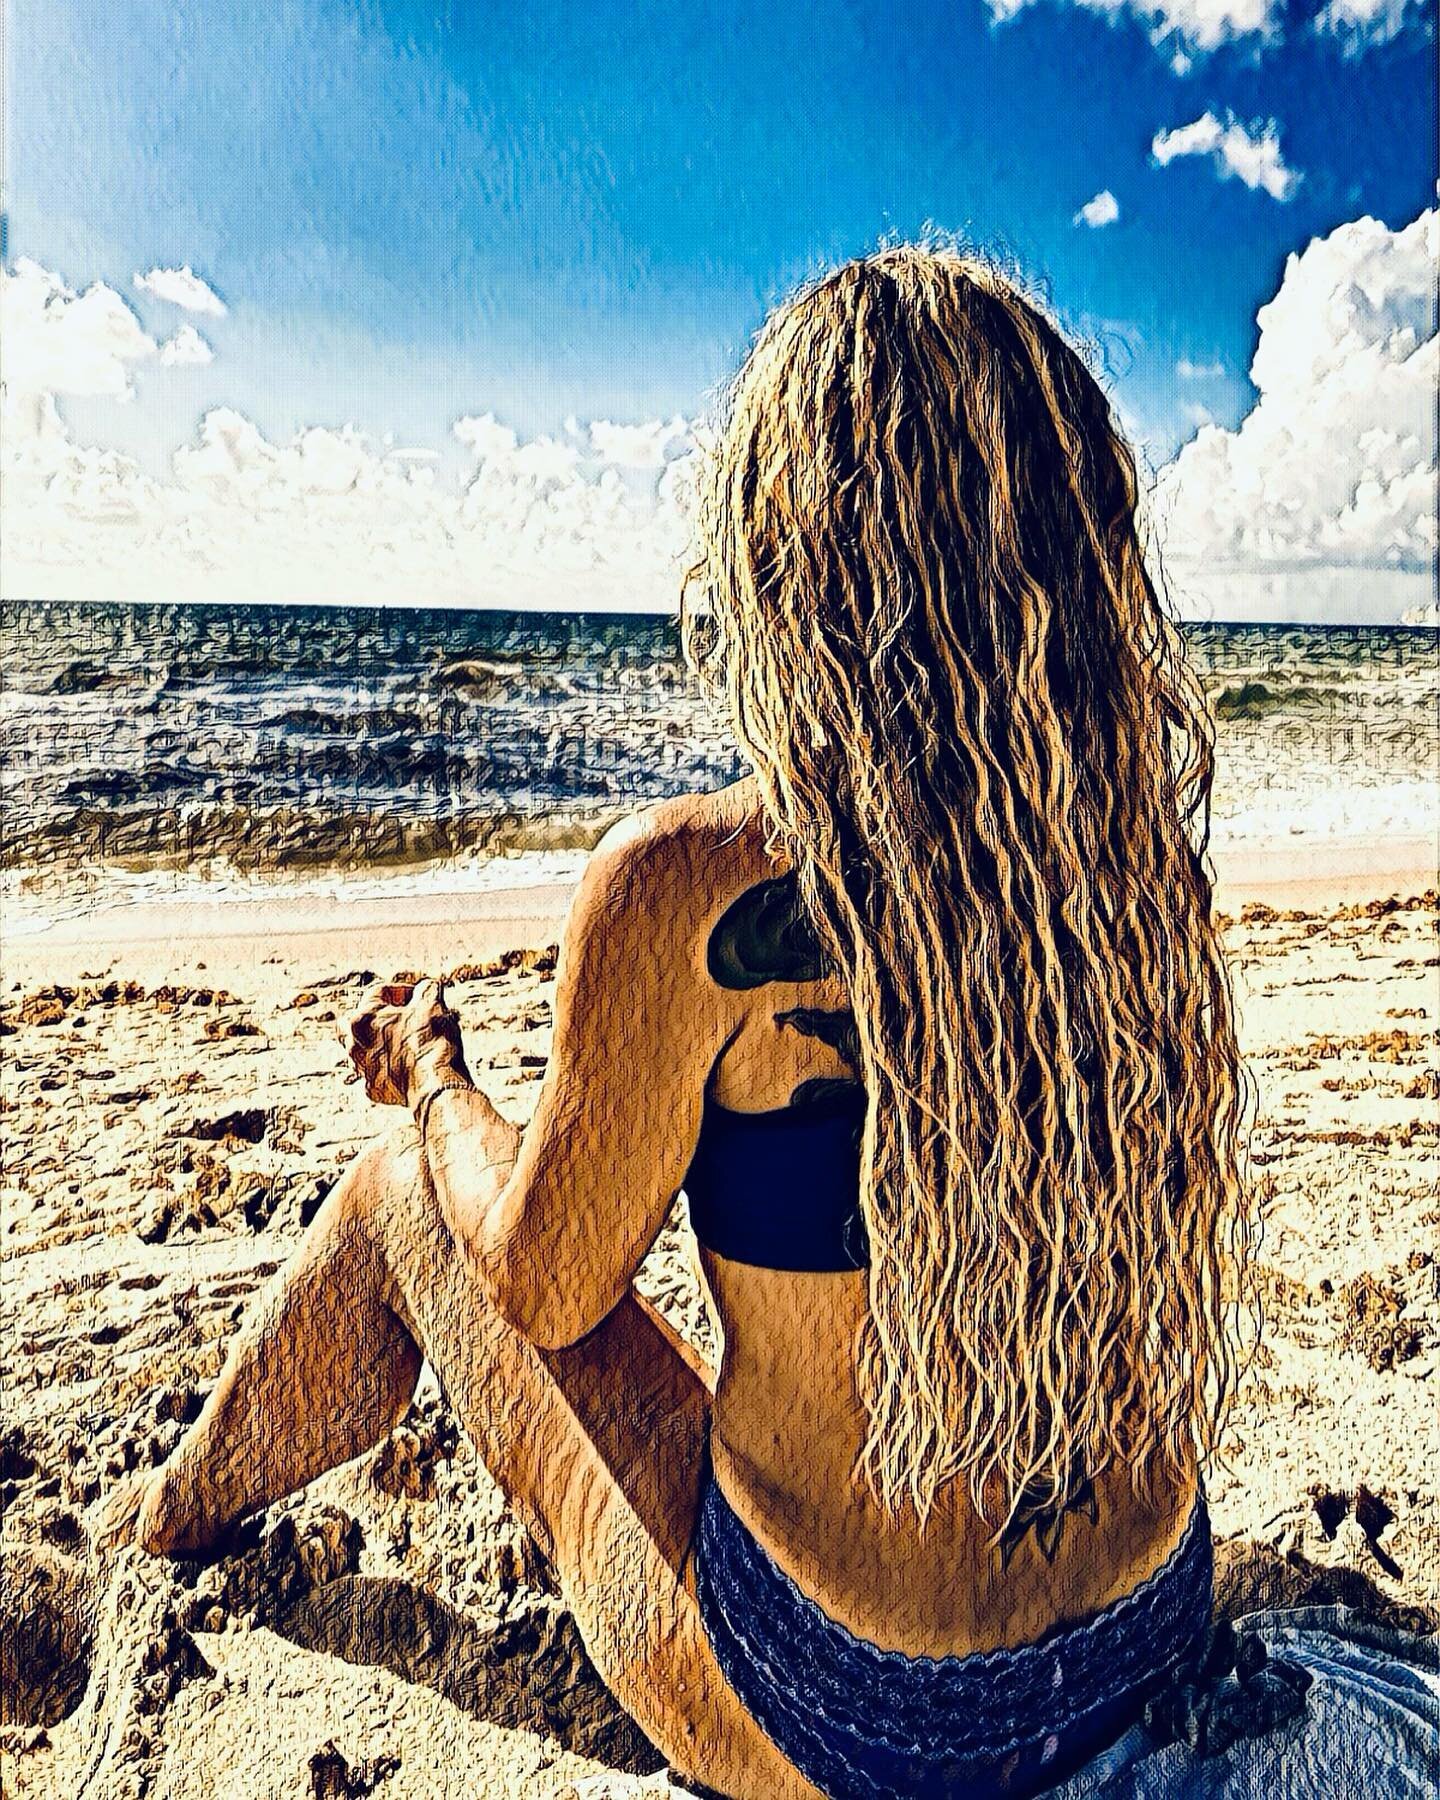 How do you ground down?

These days I&rsquo;m being reminded to stay true to my journey, to keep dreaming &amp; stay present and see all the gifts surrounding me!!

#grounded #earthing #waterismygrounding #feetonmotherearth #yogagirl #beachyoga #yoga